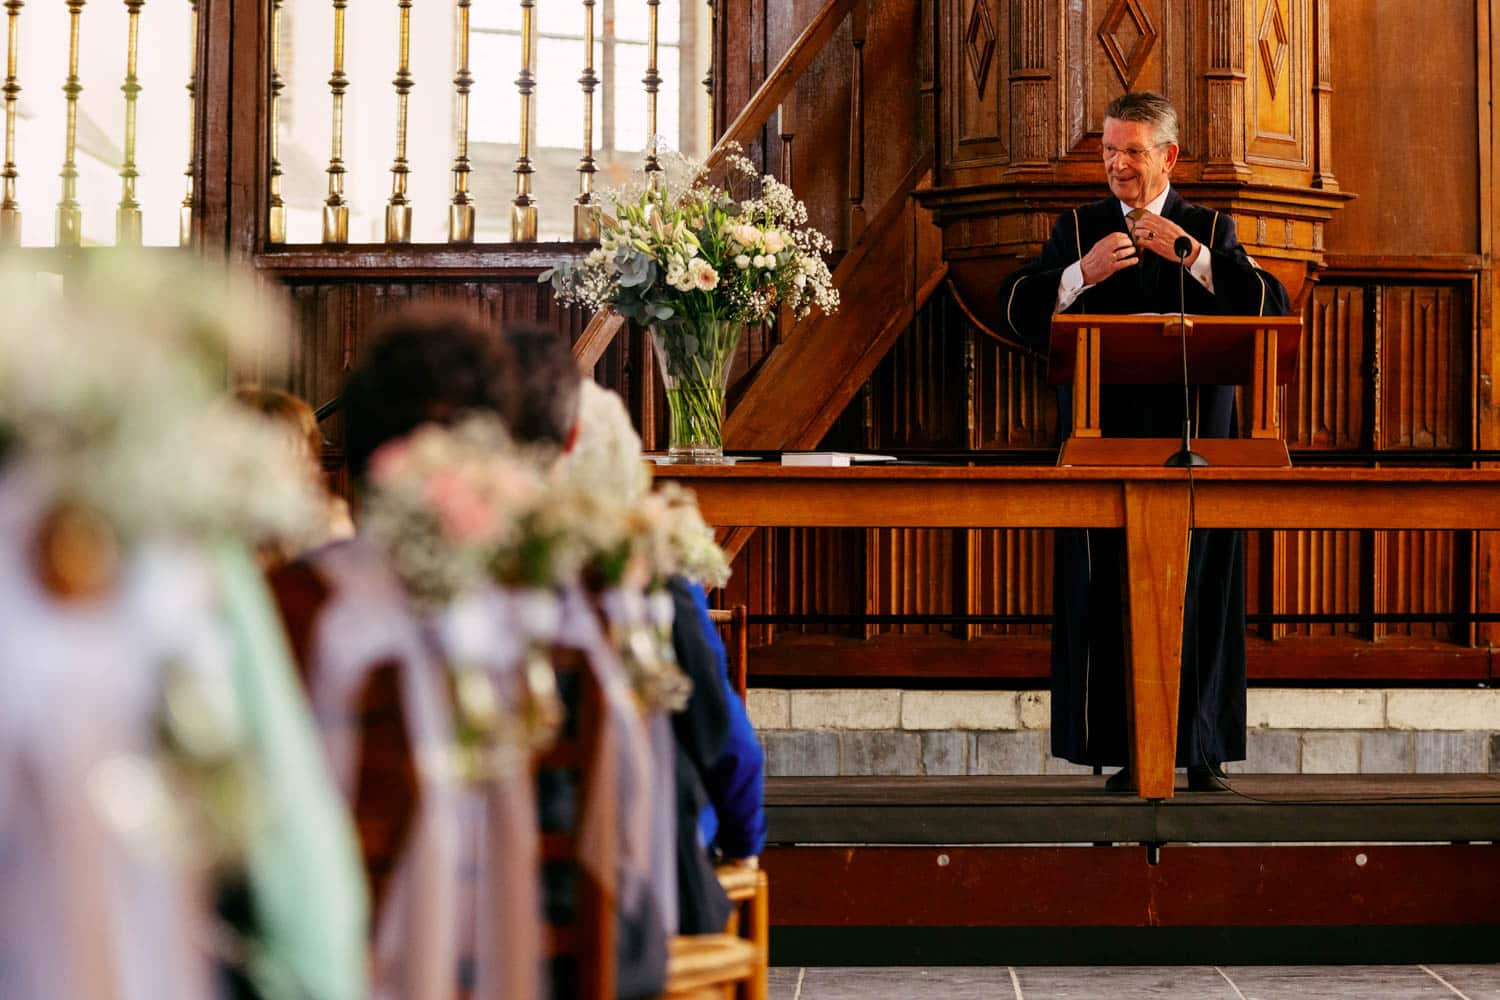 The wedding officiant in the church